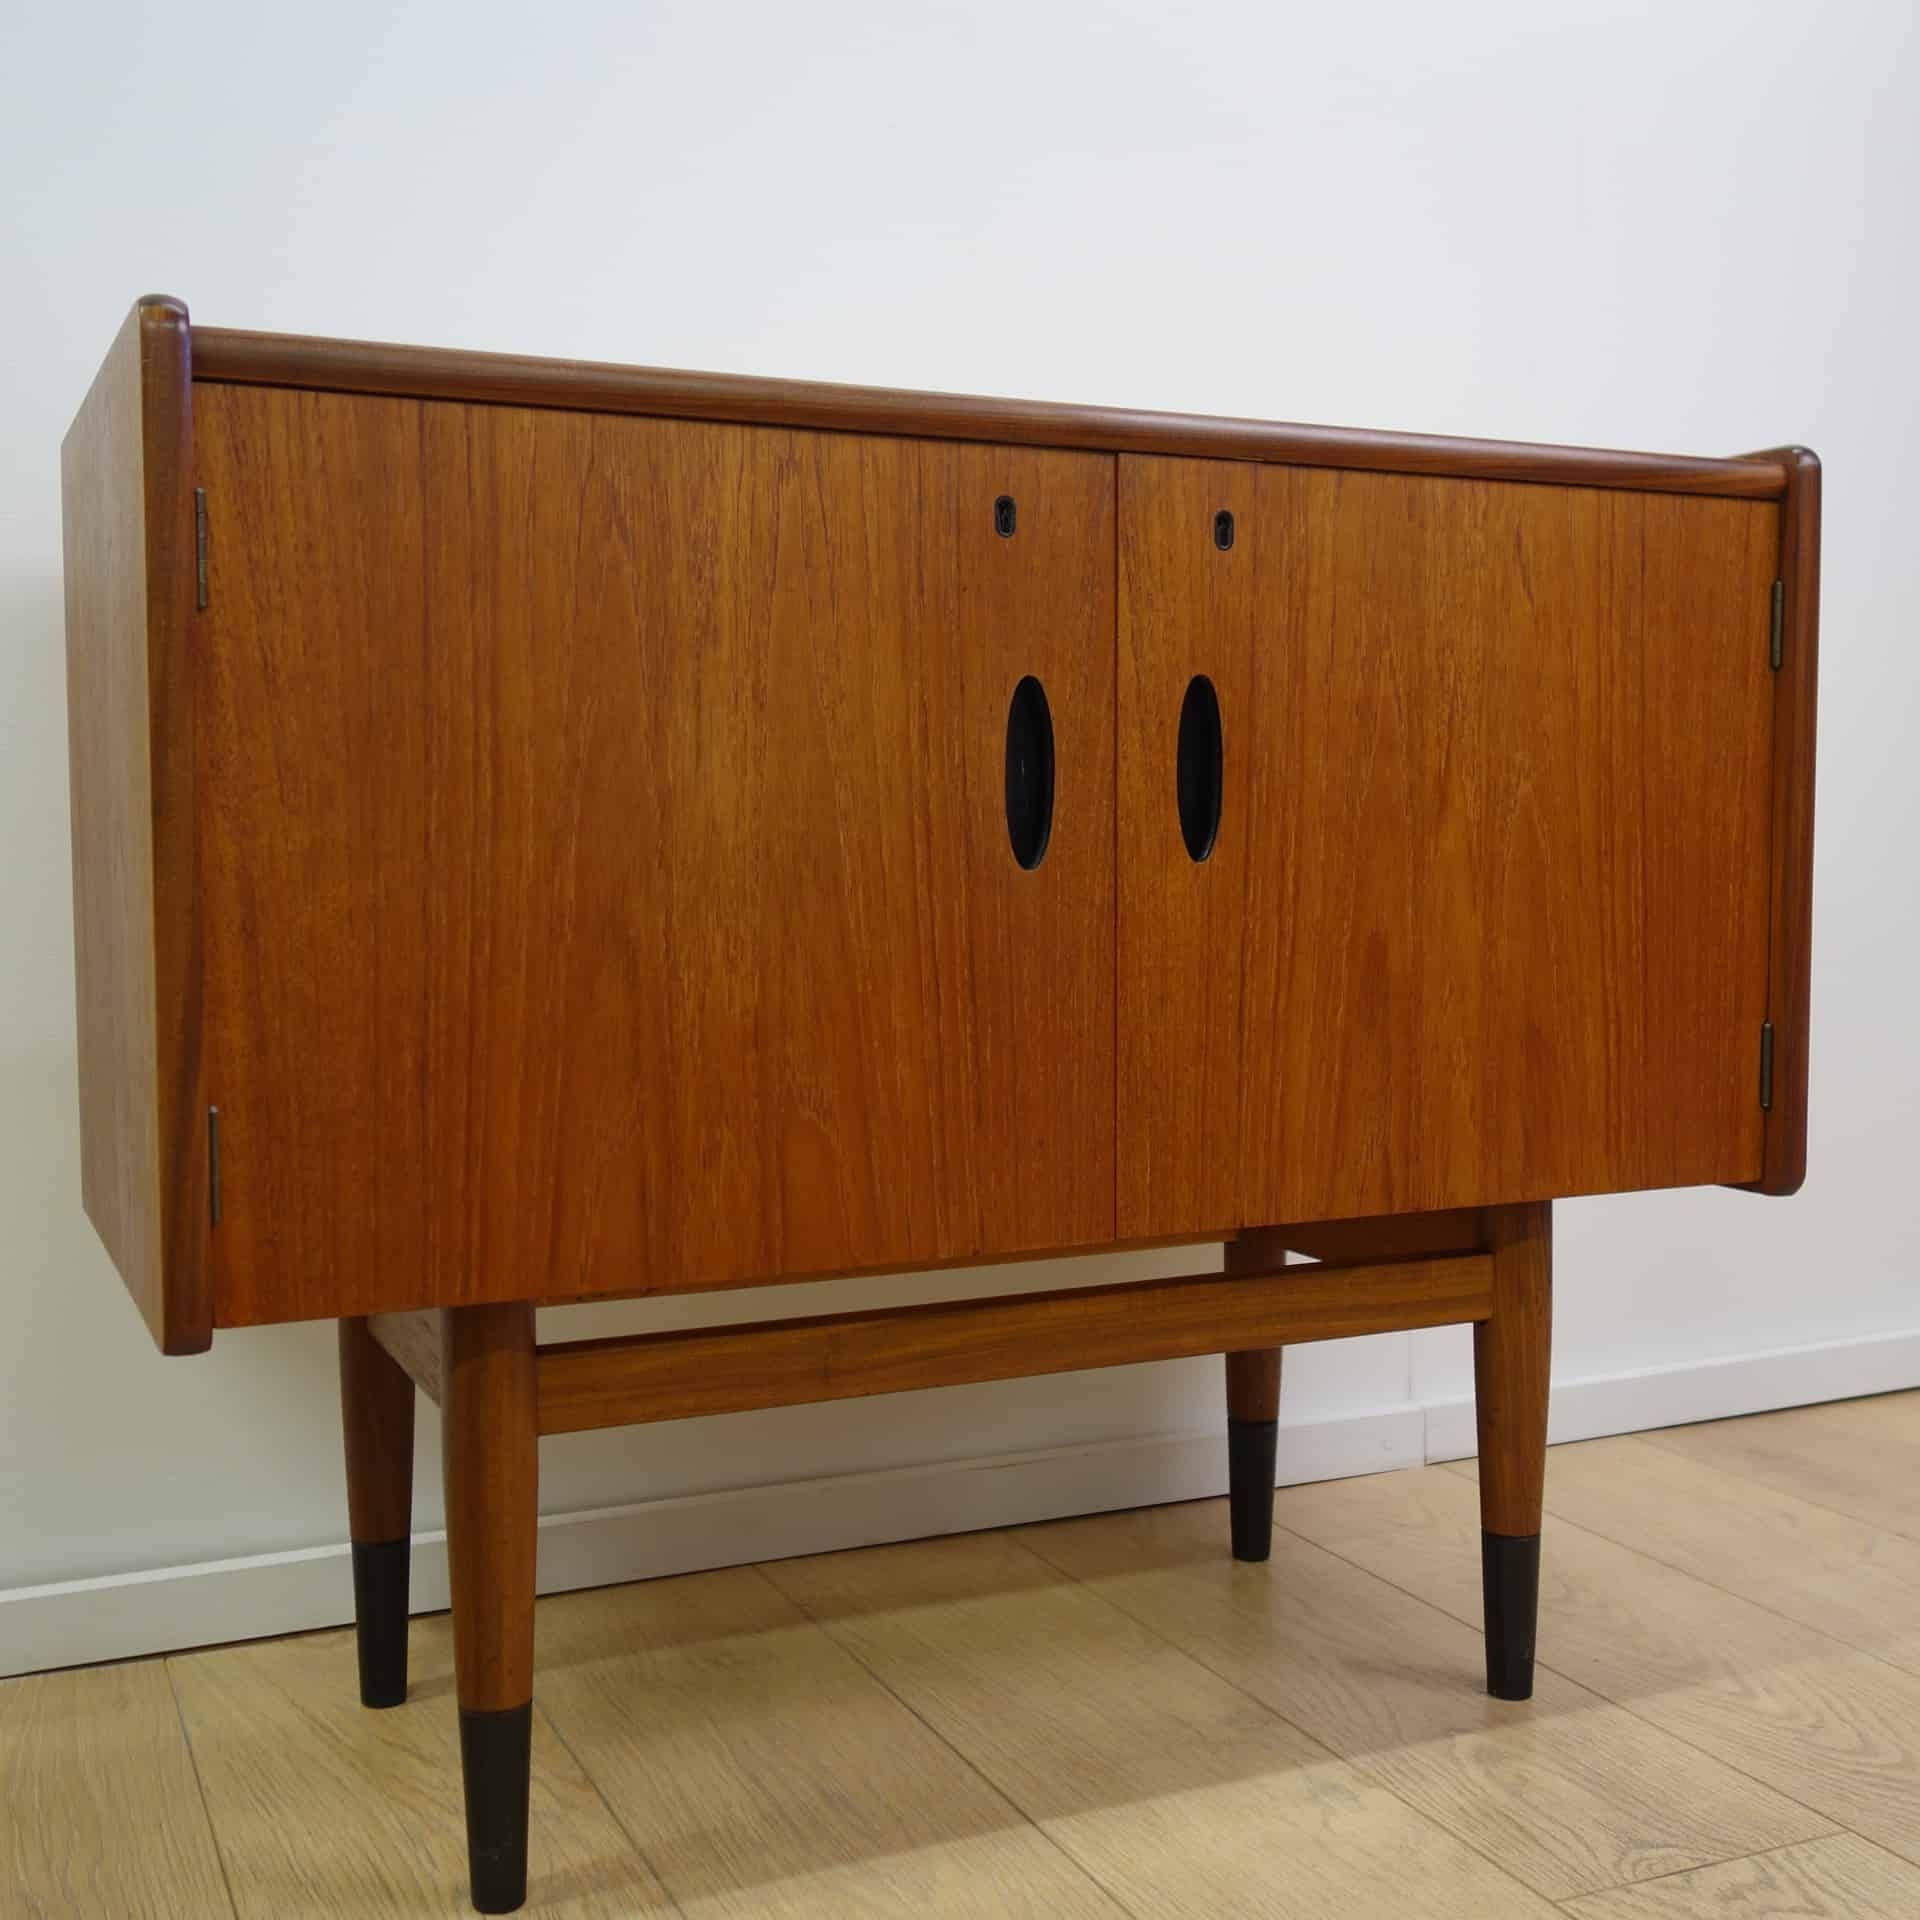 Small 1960s Teak Sideboard – Mark Parrish Mid Century Modern Intended For 2017 Parrish Sideboards (View 3 of 20)